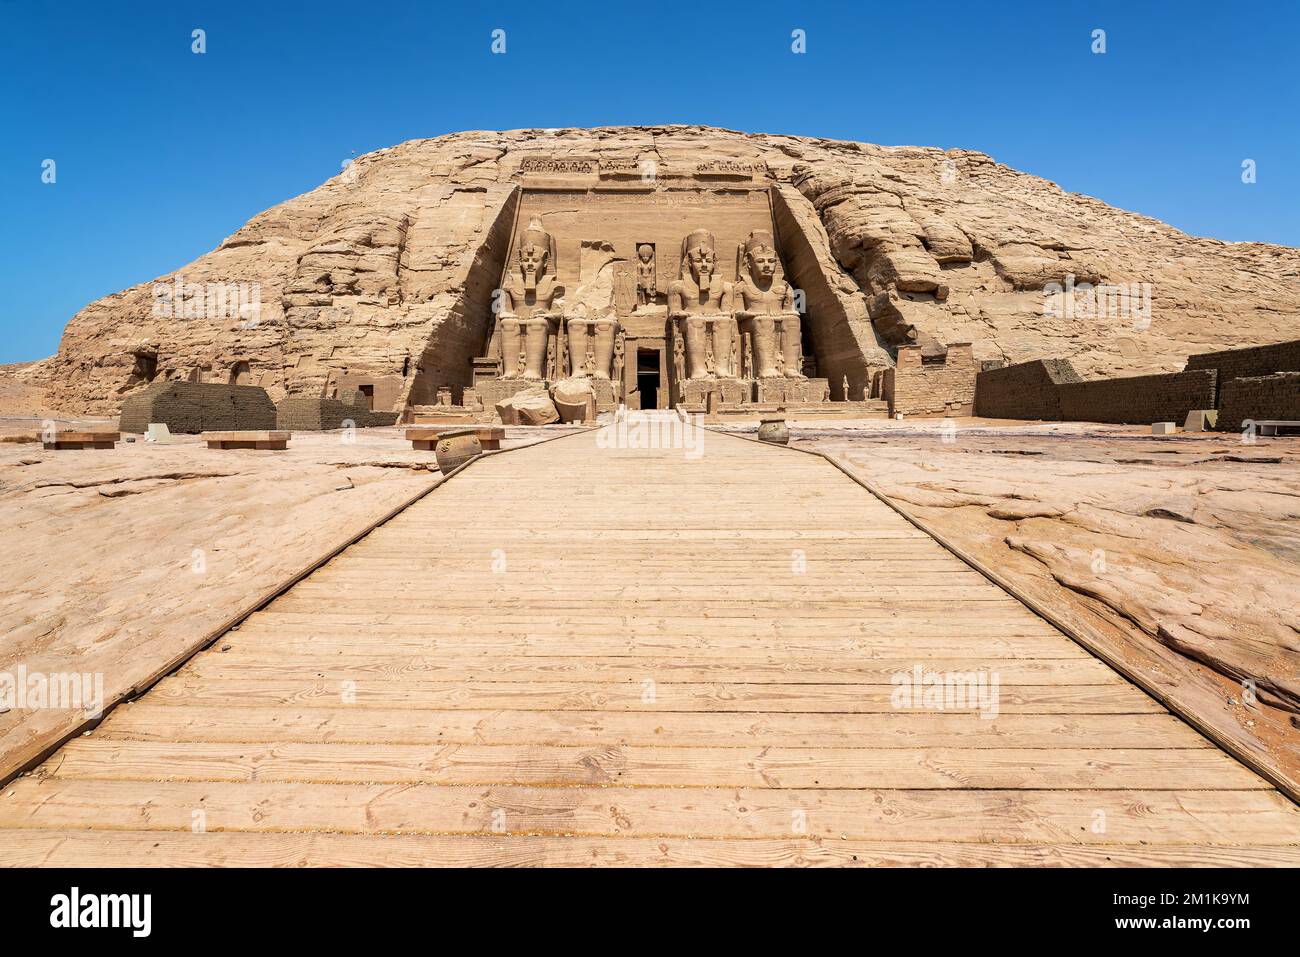 Amazing view of Abu Simbel temple in the south of Egypt Stock Photo